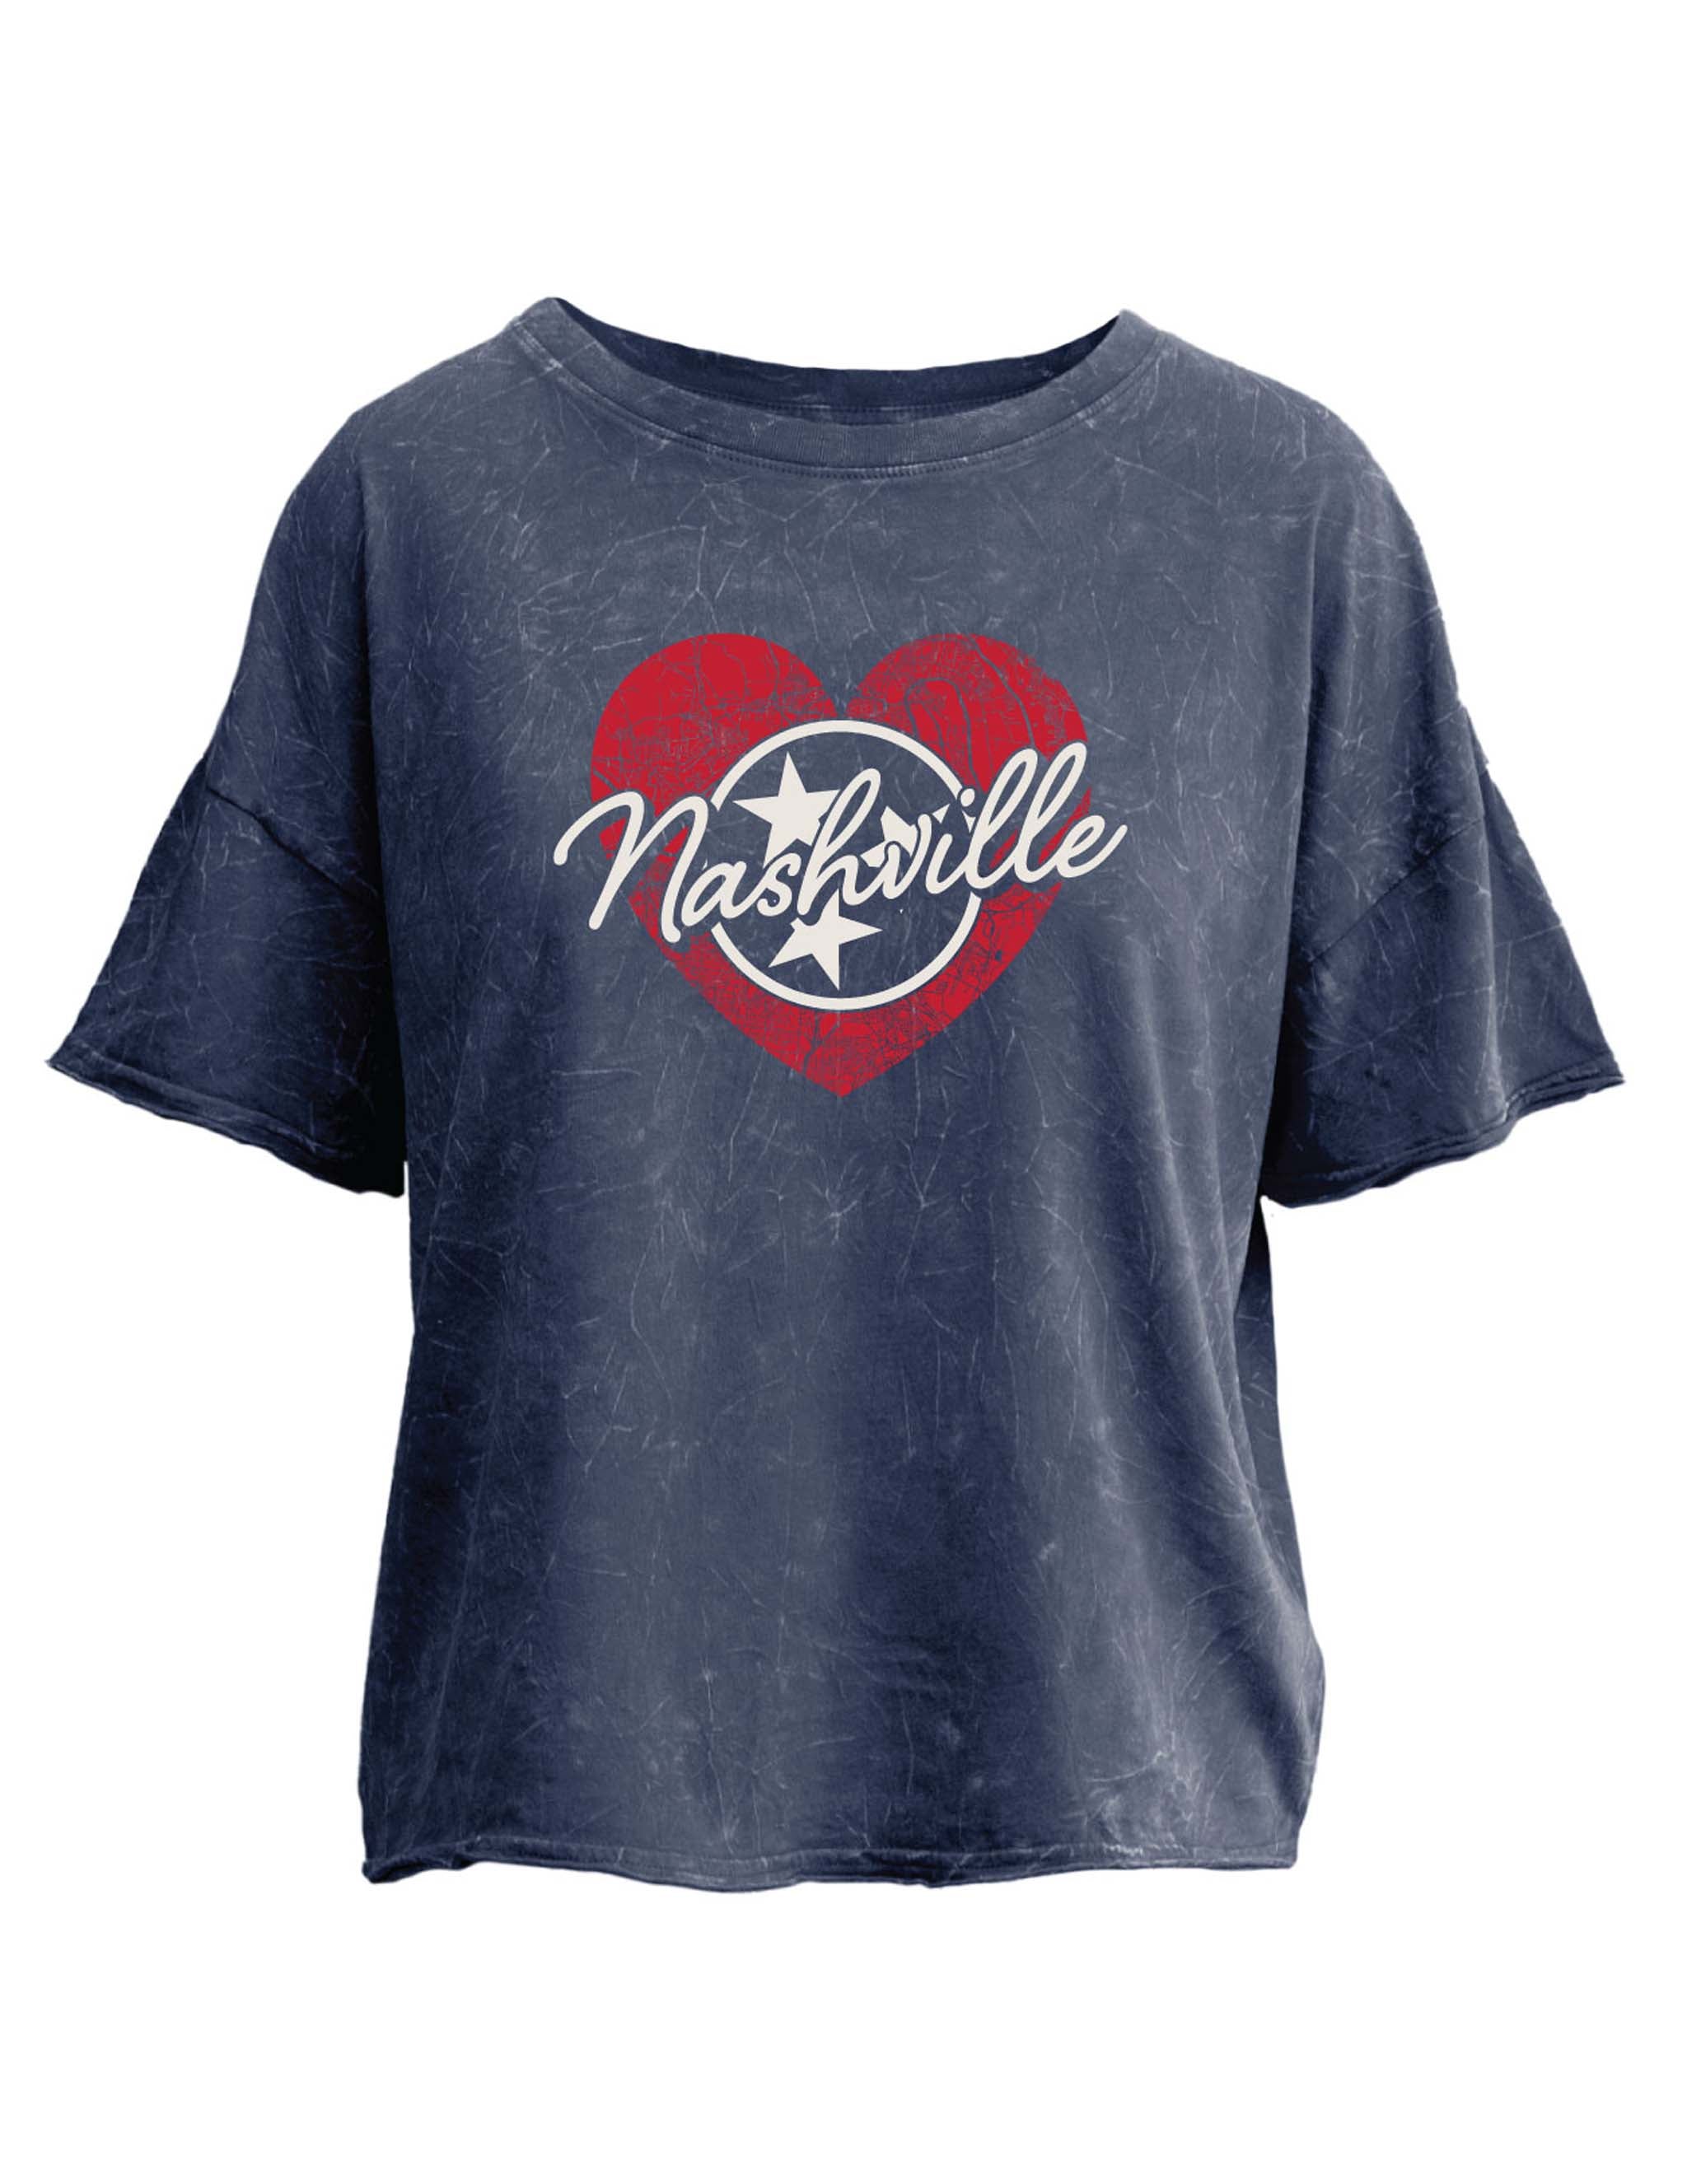 Nashville Heart Cropped Distressed Tee